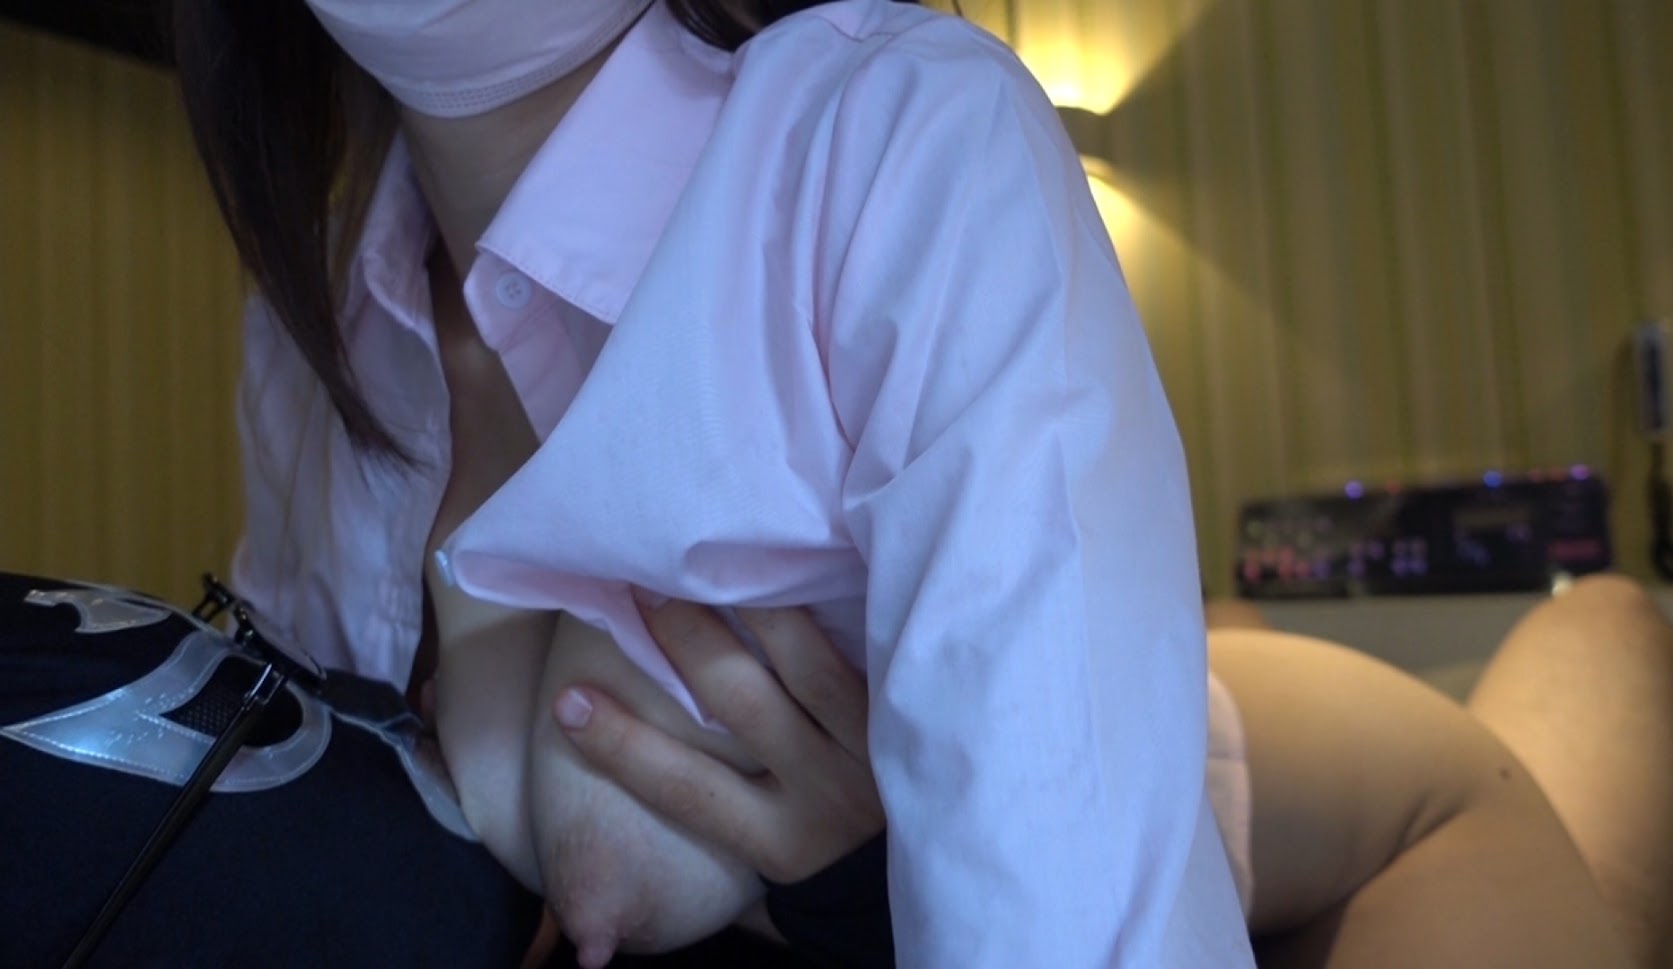 FC2-PPV 2368488 Ria chan Constriction on the ultimate thin waist Gonzo with uniform costume Ecchi handjob launch